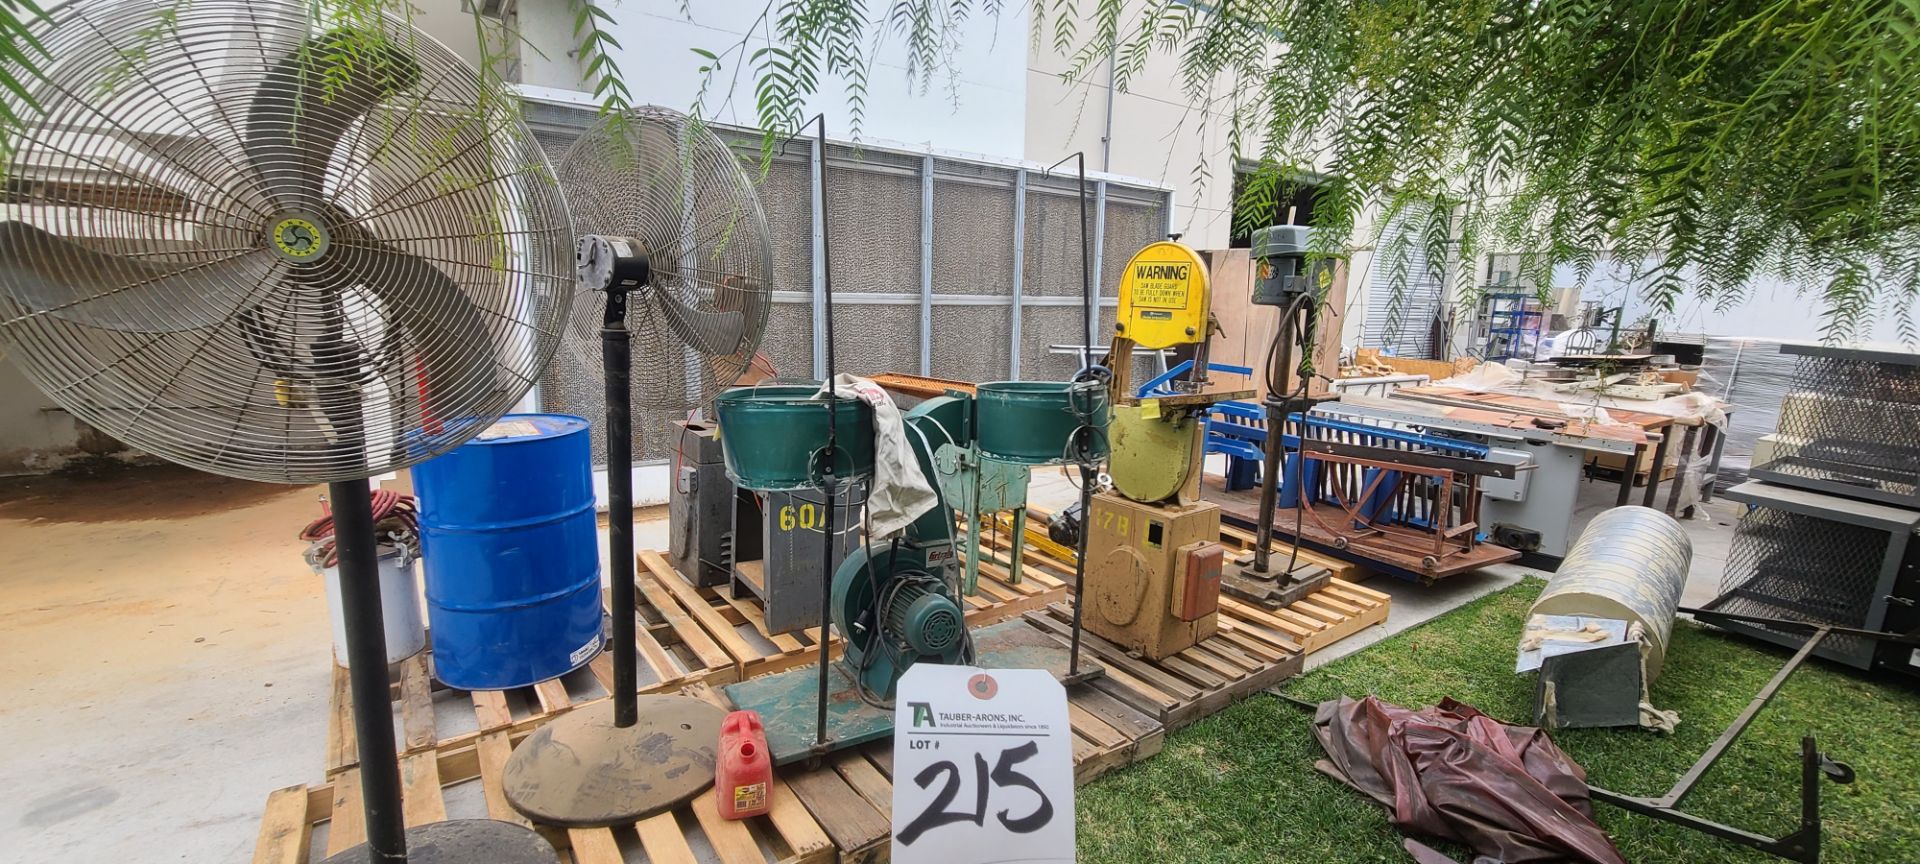 (Lot) Assorted Machinery, Band Saw, Drill Press, Dust Collector, Fans